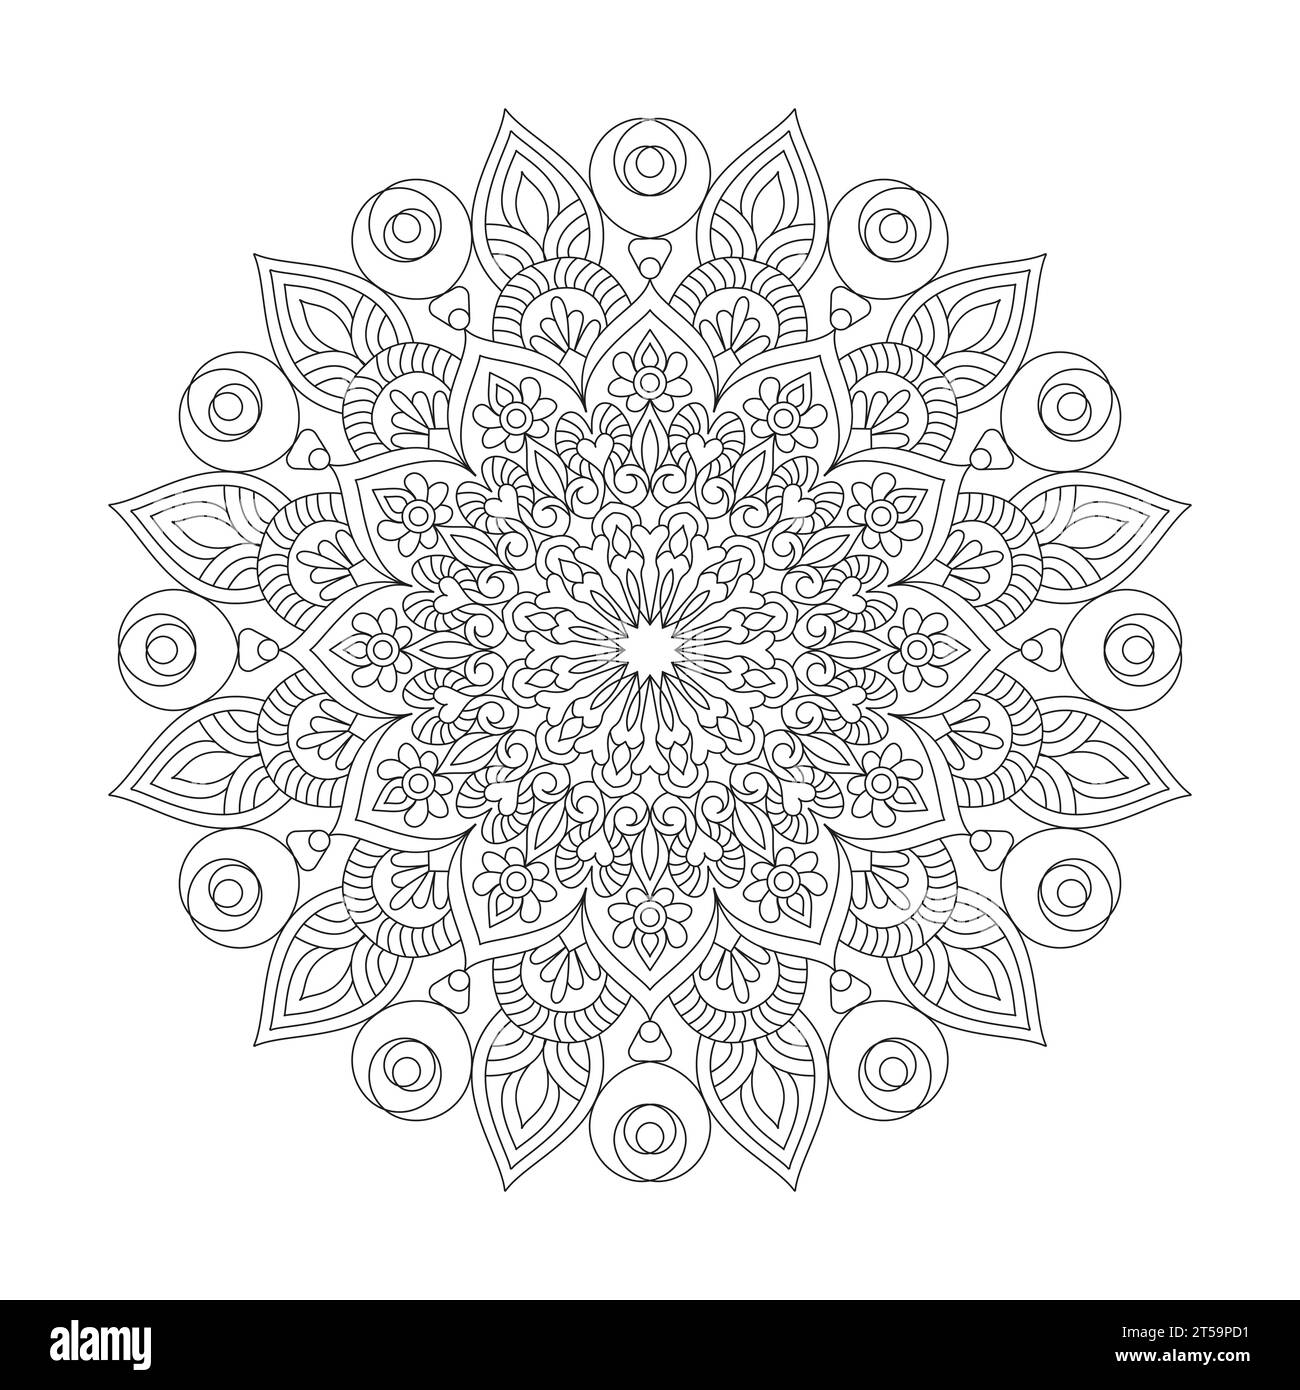 Mandala inner peace adult colouring book page for KDP book interior. Peaceful Petals, Ability to Relax, Brain Experiences, Harmonious Haven, Peaceful P Stock Vector